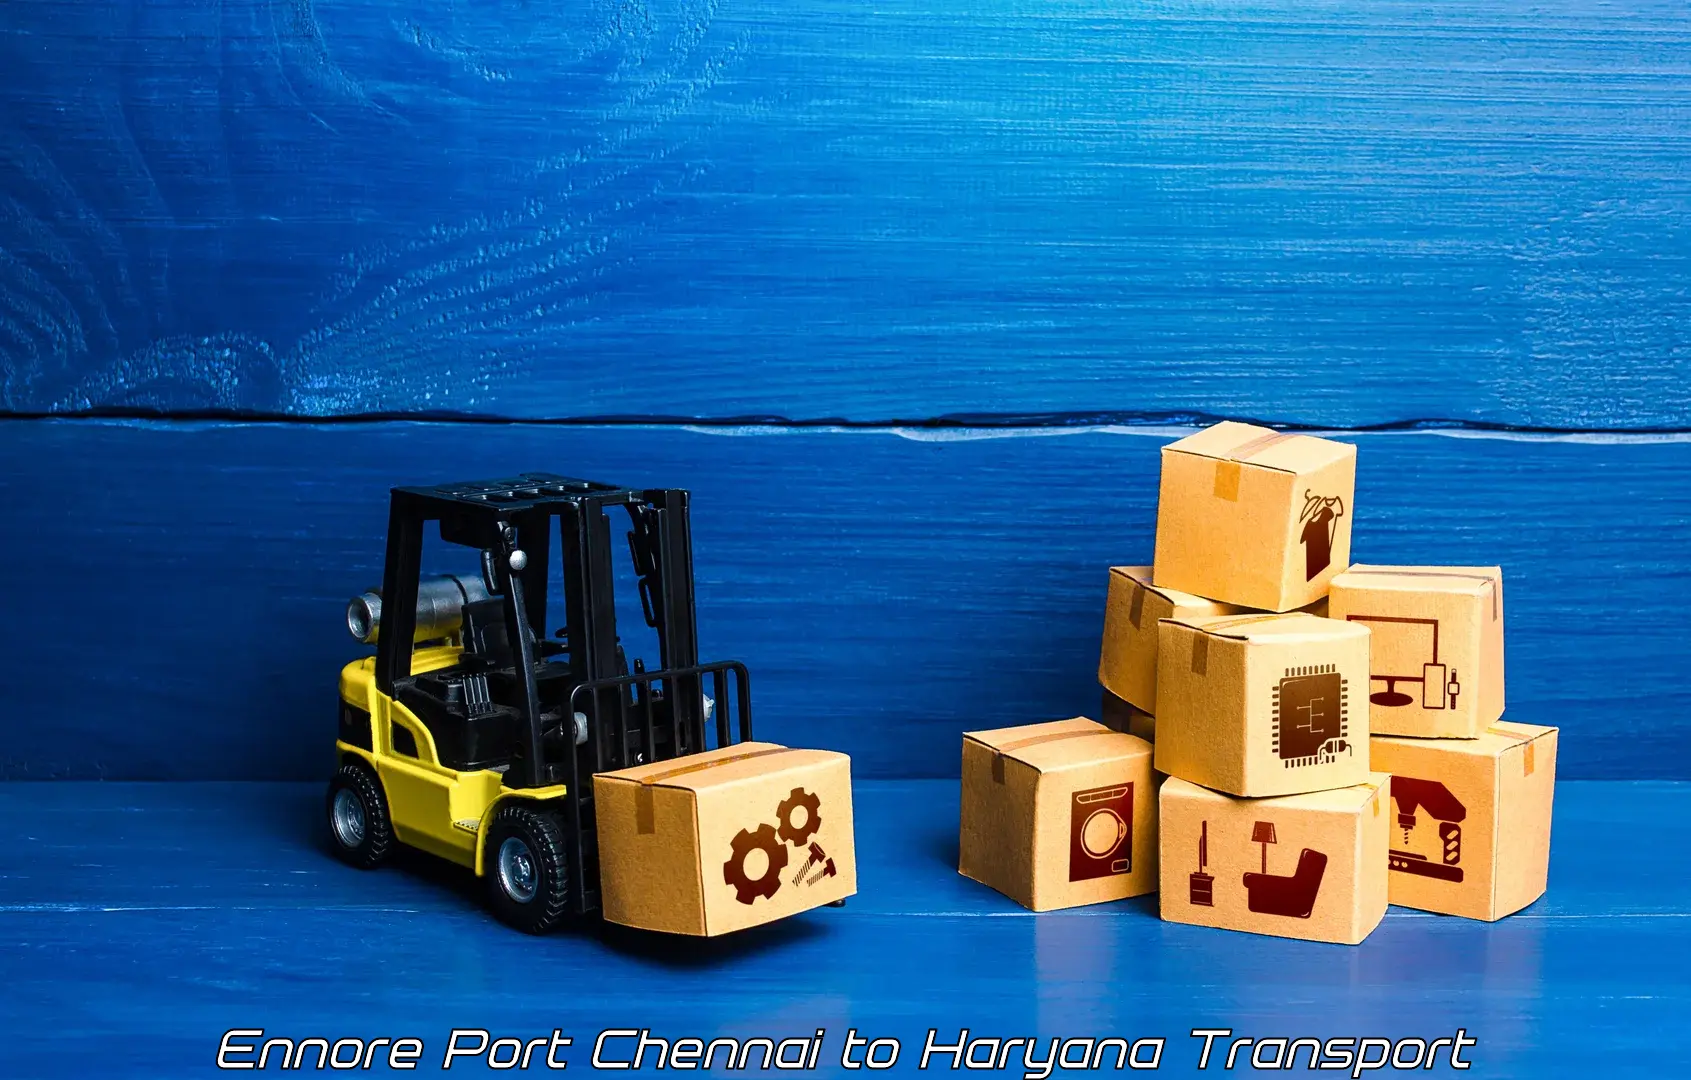 Part load transport service in India Ennore Port Chennai to Ambala